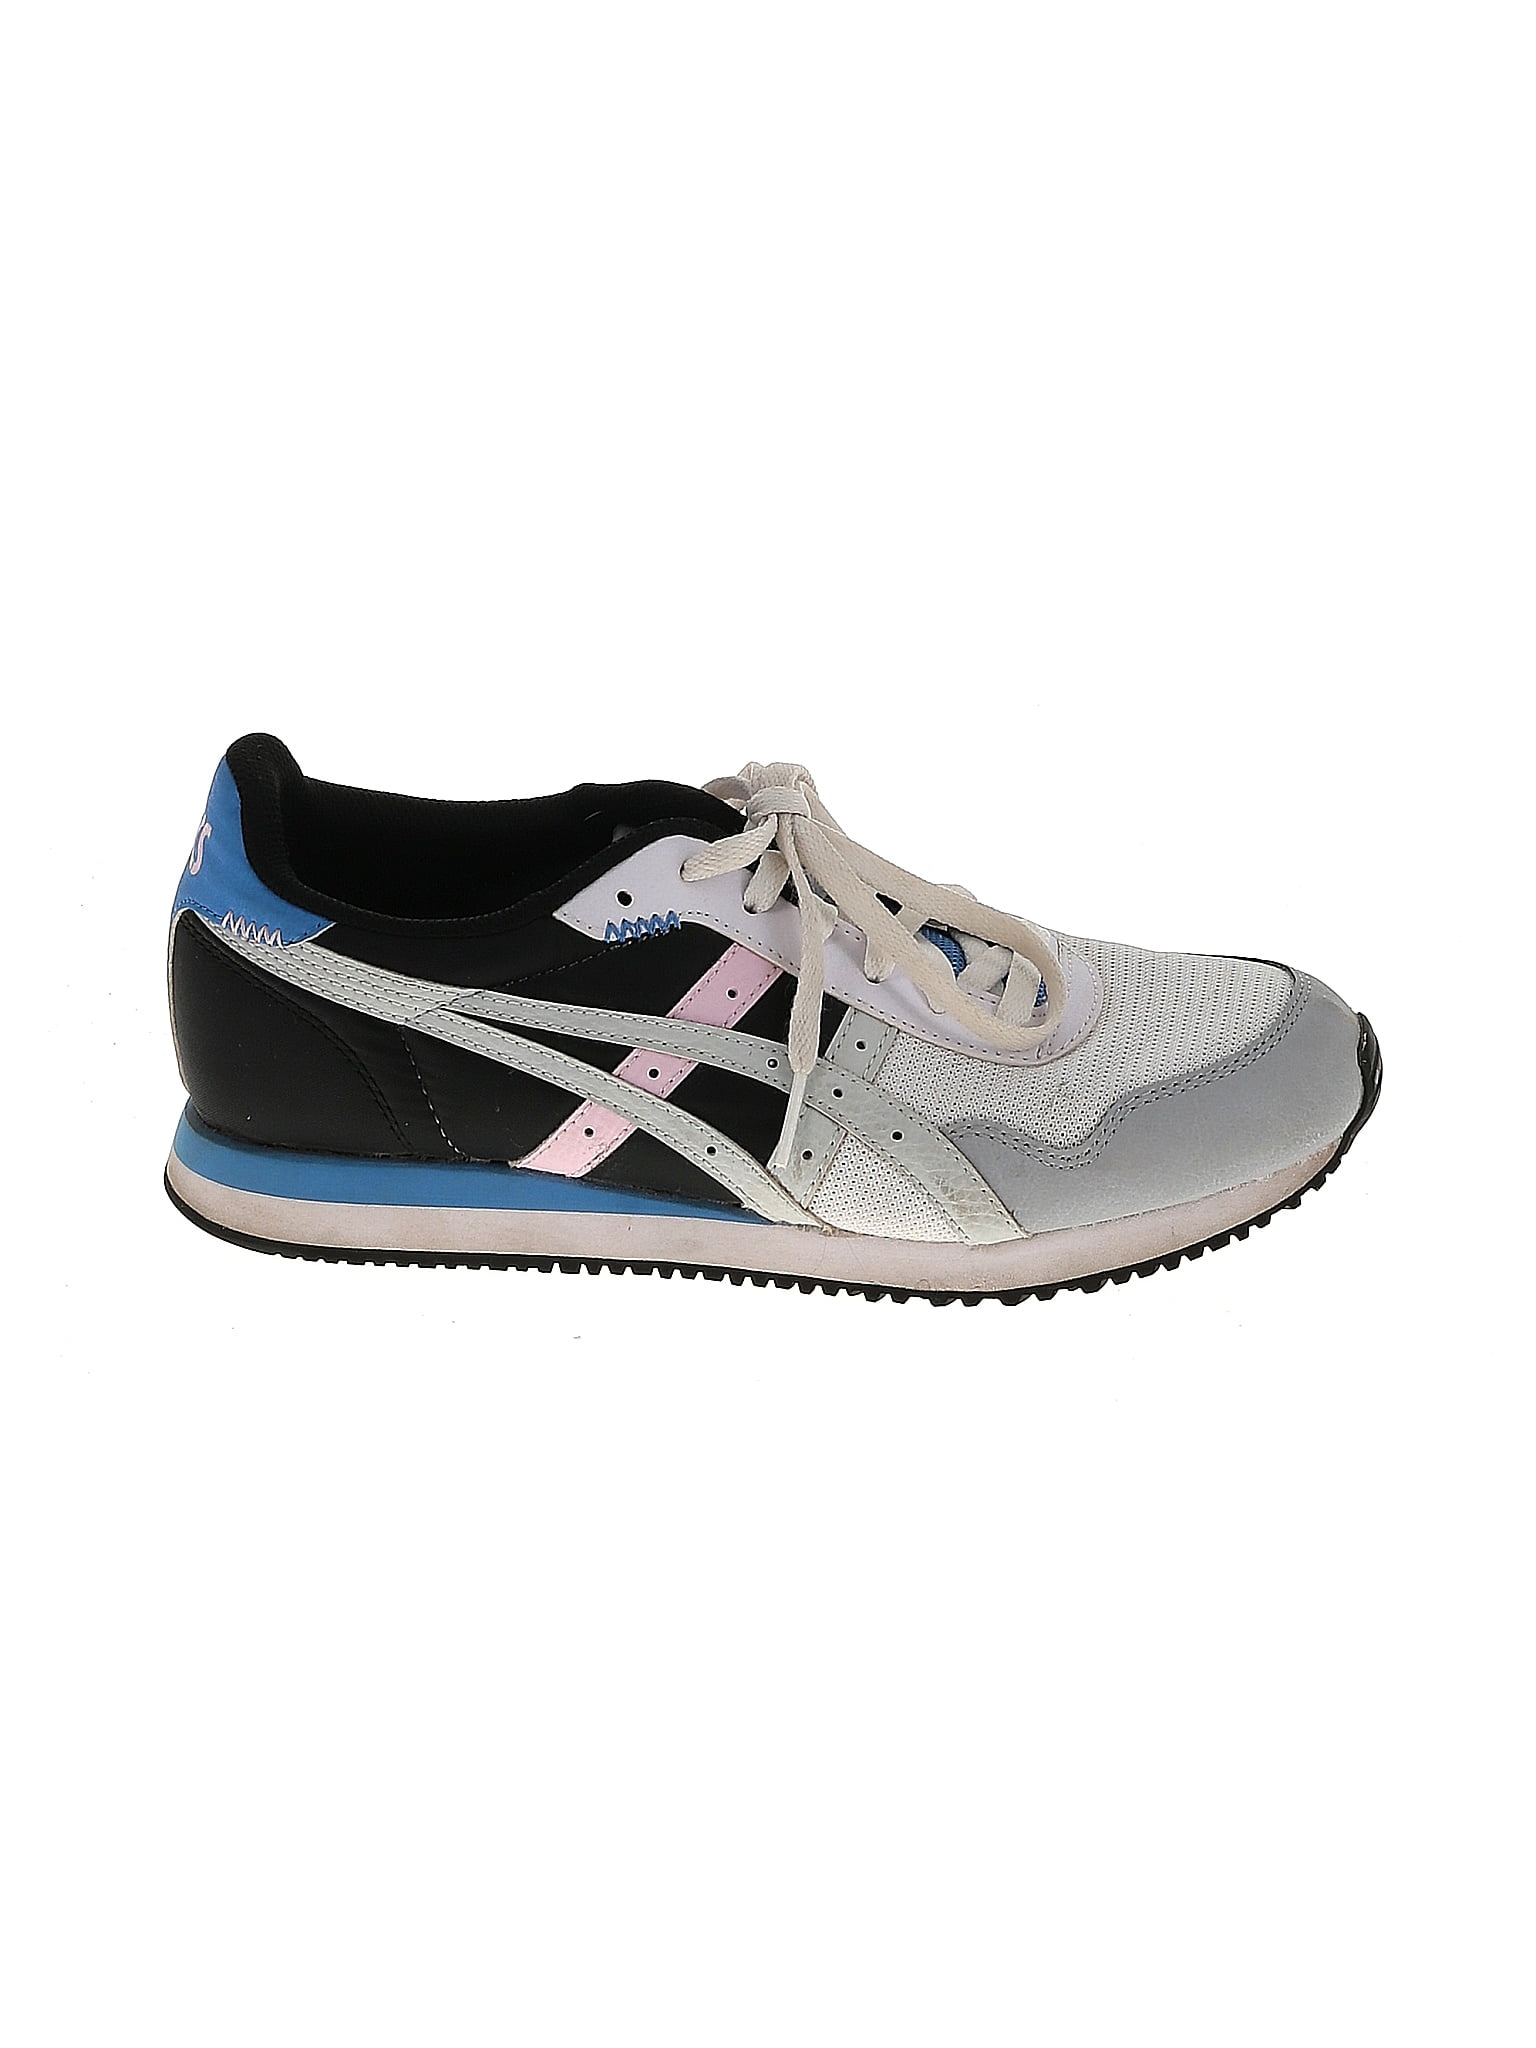 Asics Color Block Multi Color Gray Sneakers Size 9 - 61% off | thredUP